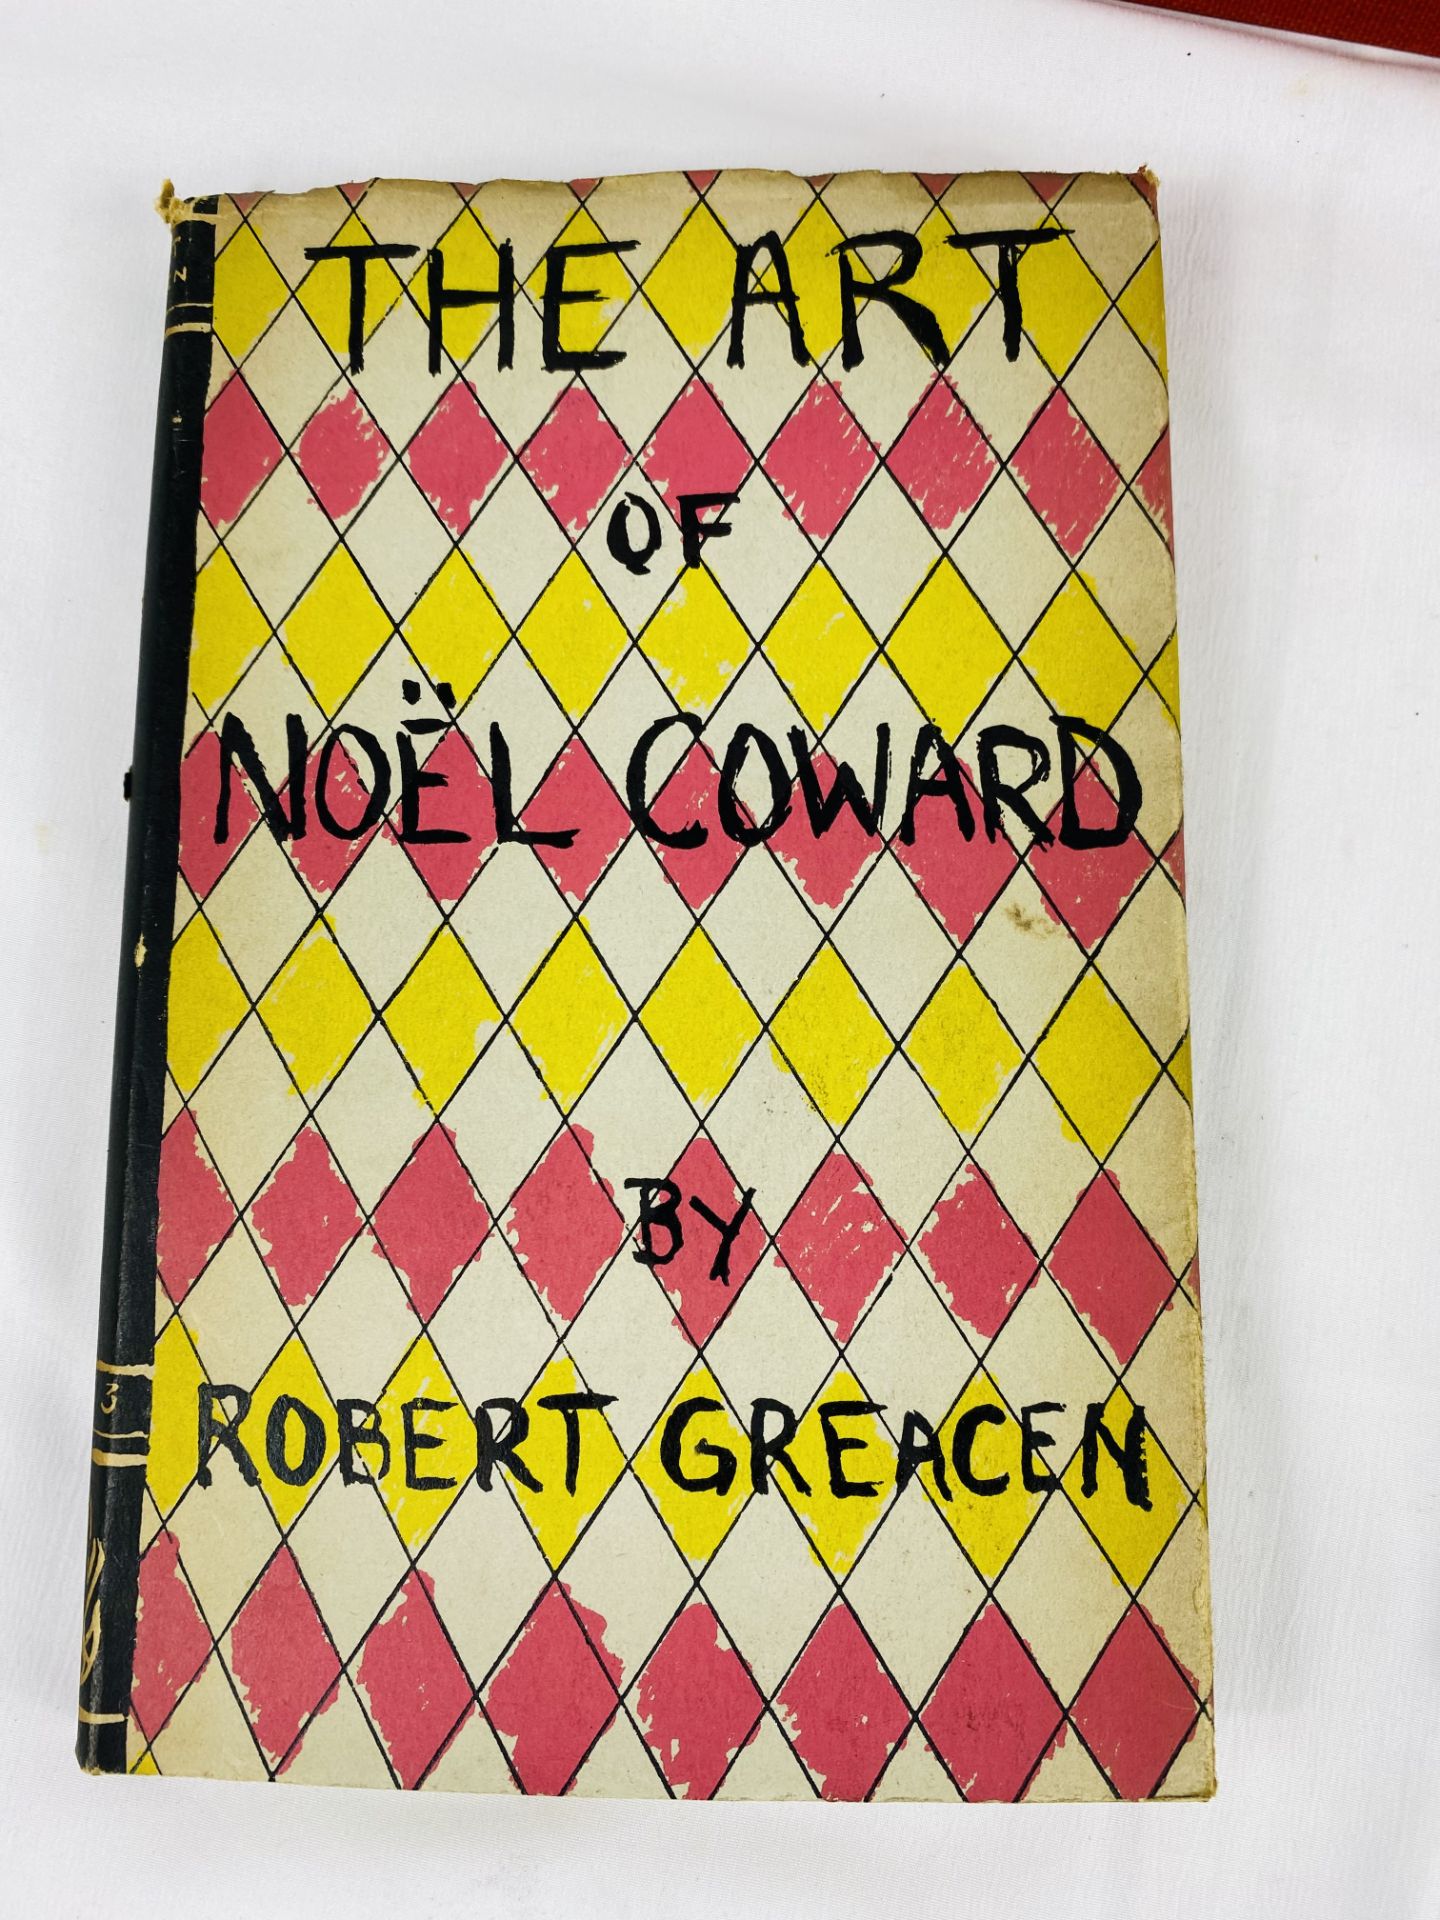 Noel Coward, Quadrille, together with two copies of The Art of Noel Coward by Robert Greacen - Image 2 of 7